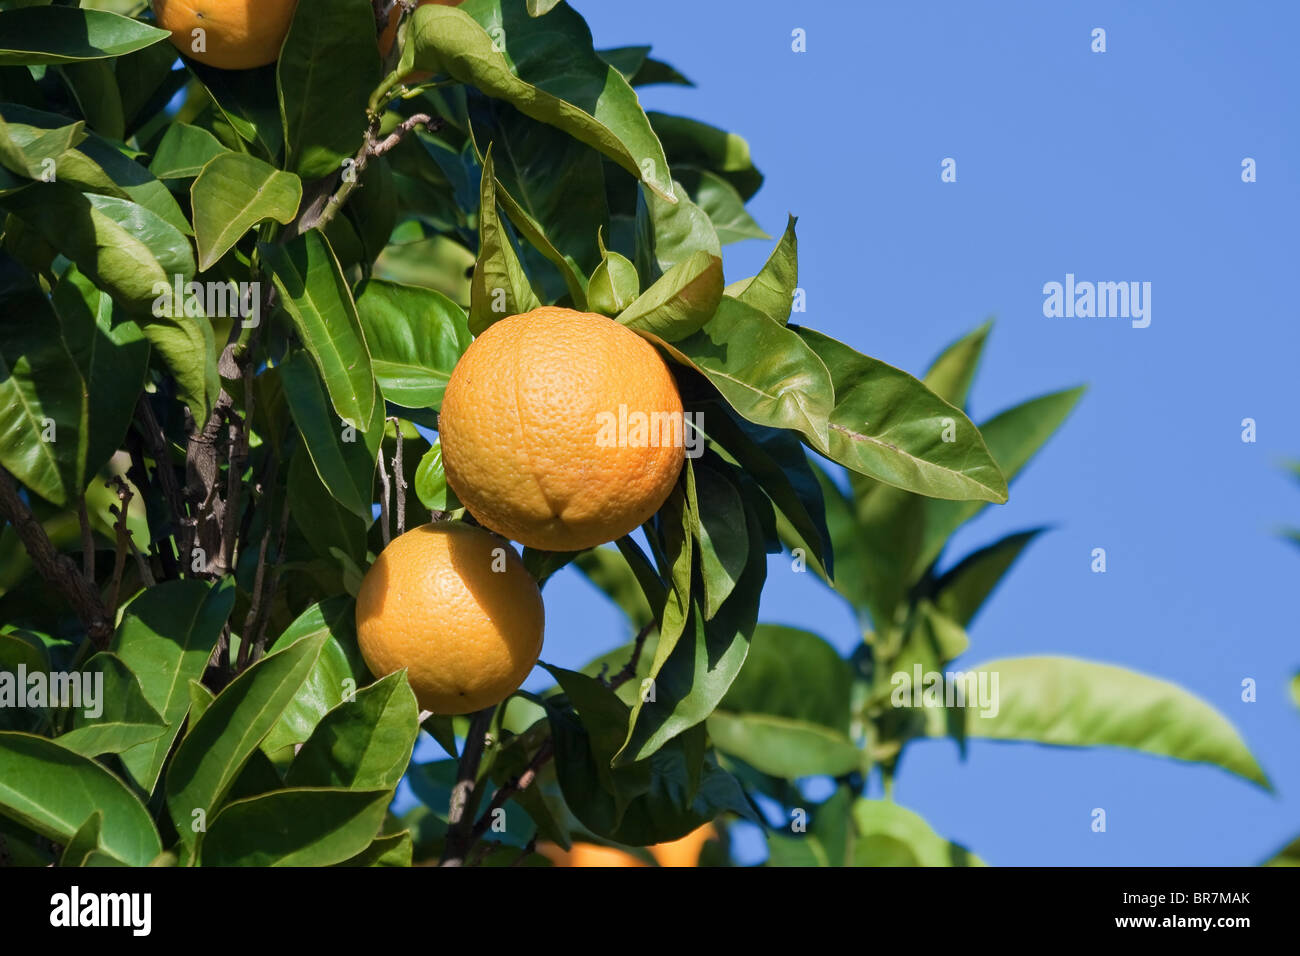 ripe oranges are hanging on a tree under a bright blue sky Stock Photo